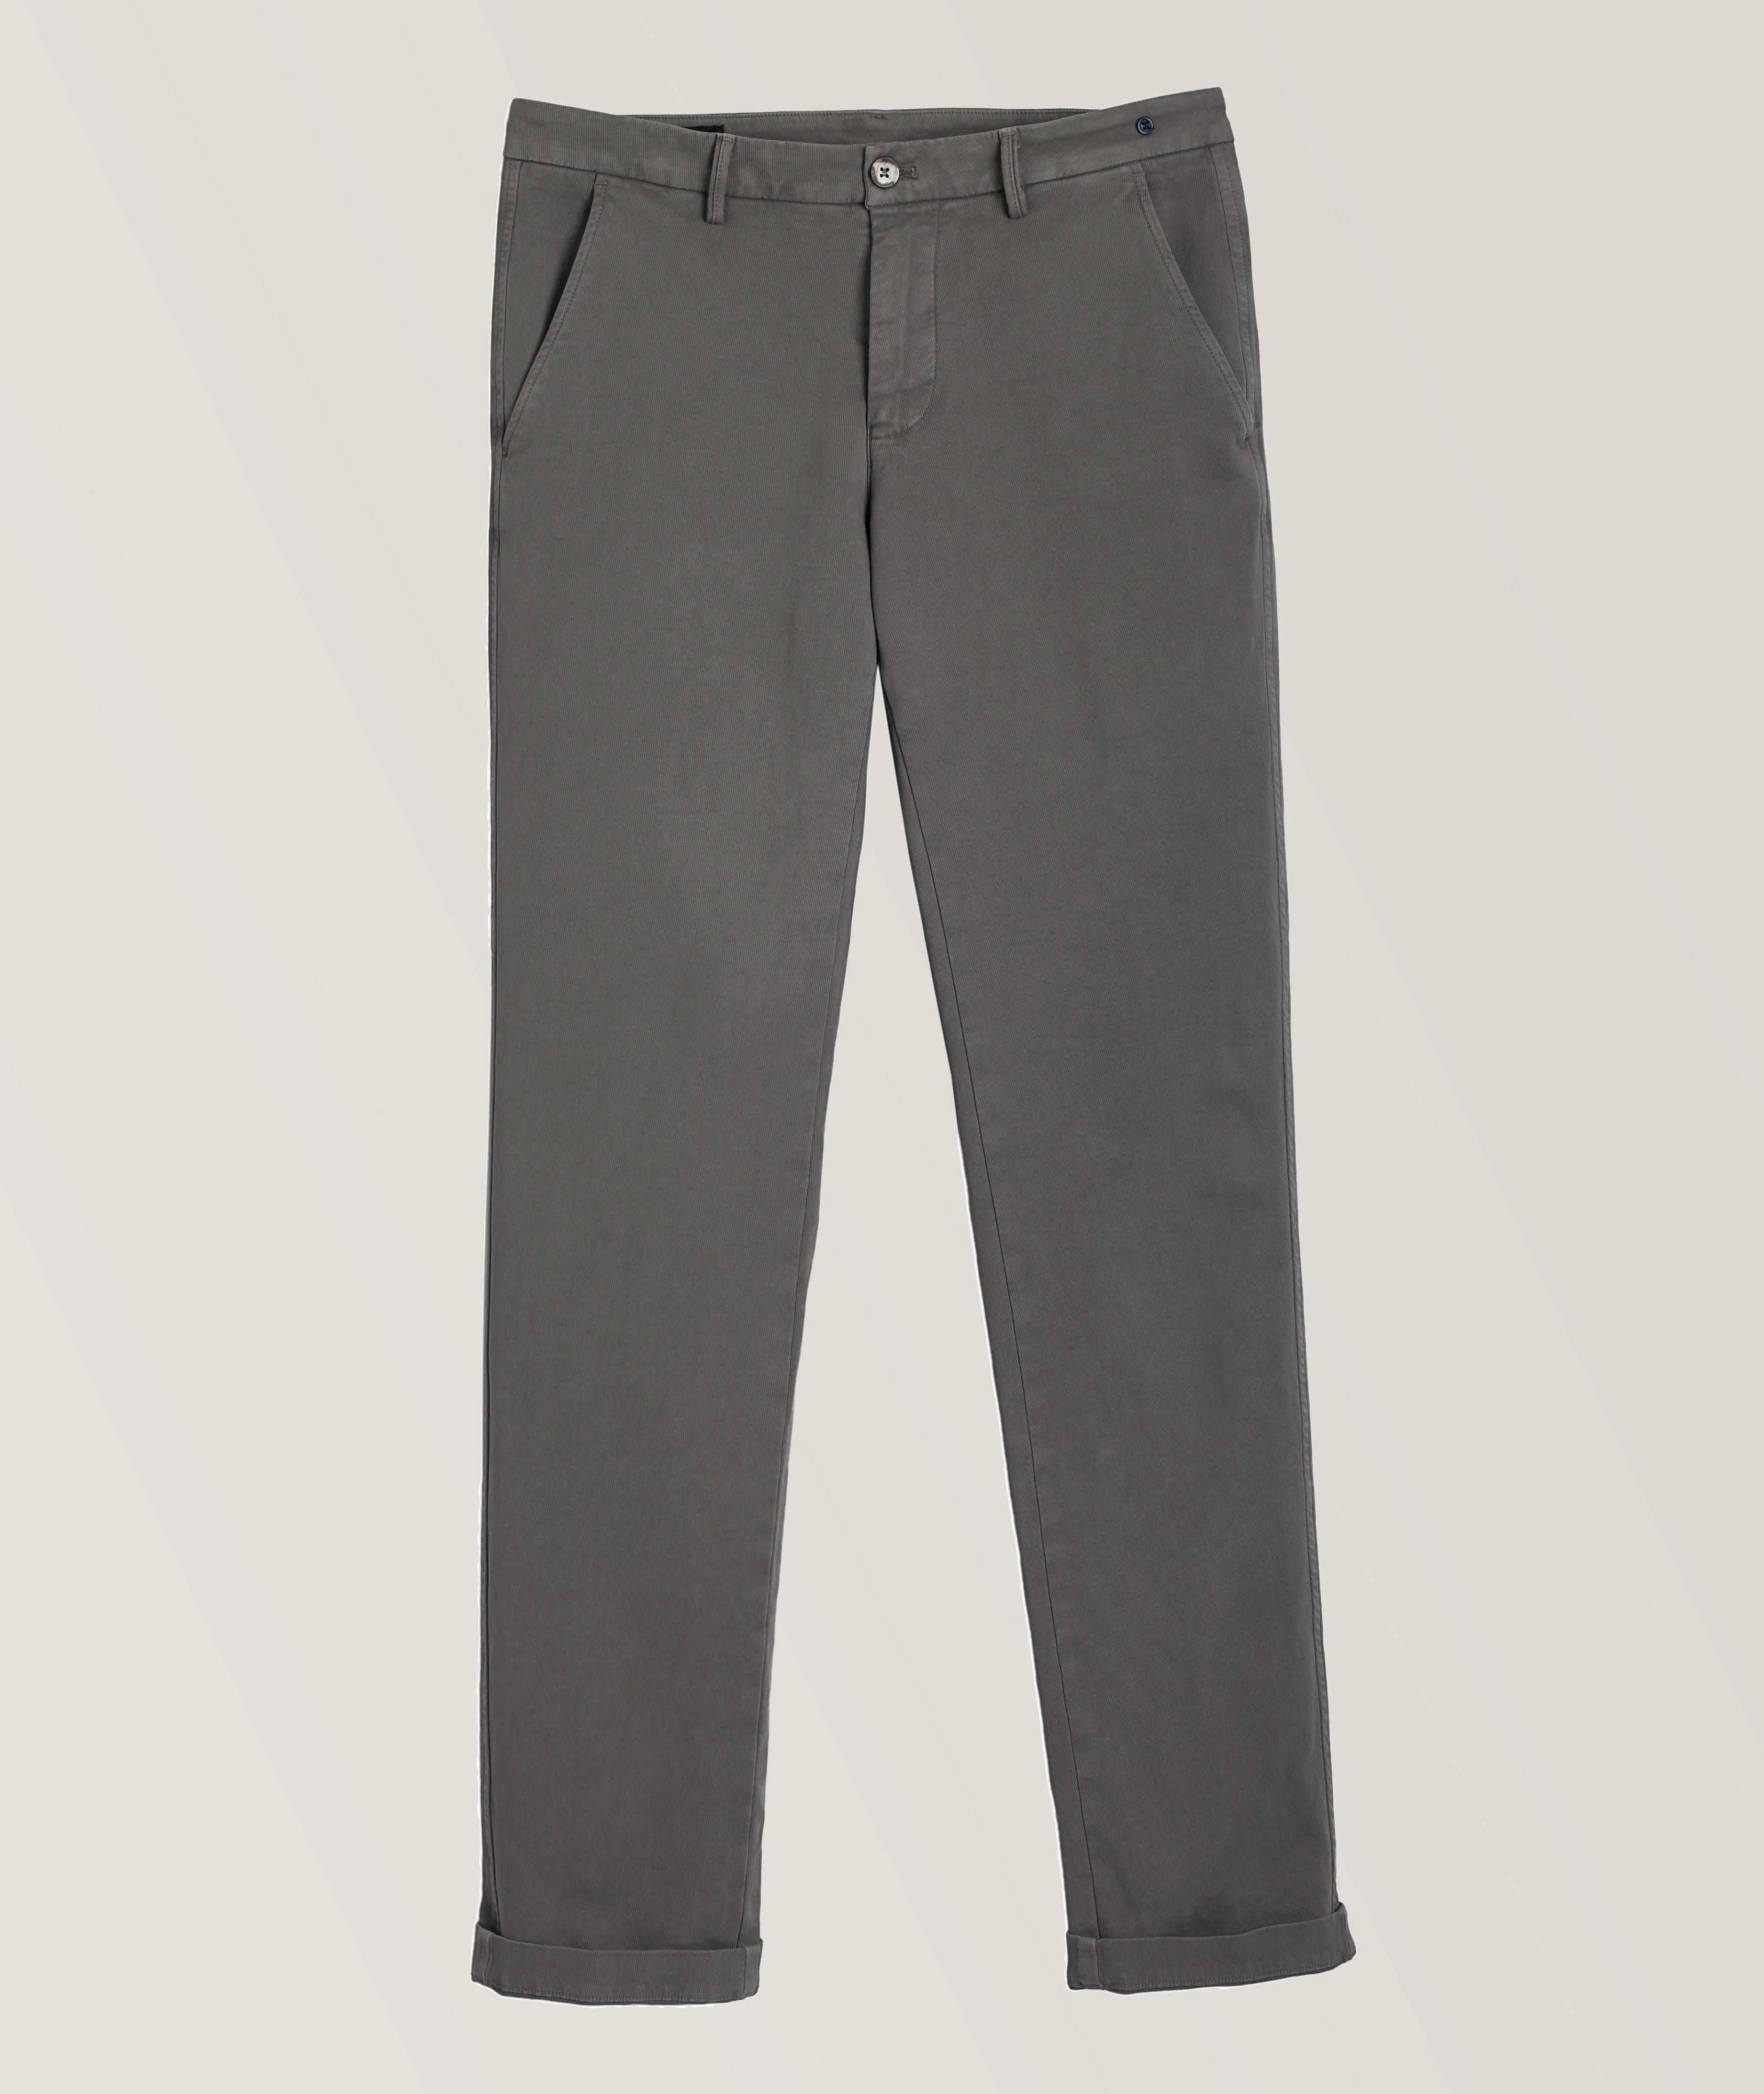 all in motion Gray Active Pants Size L - 41% off